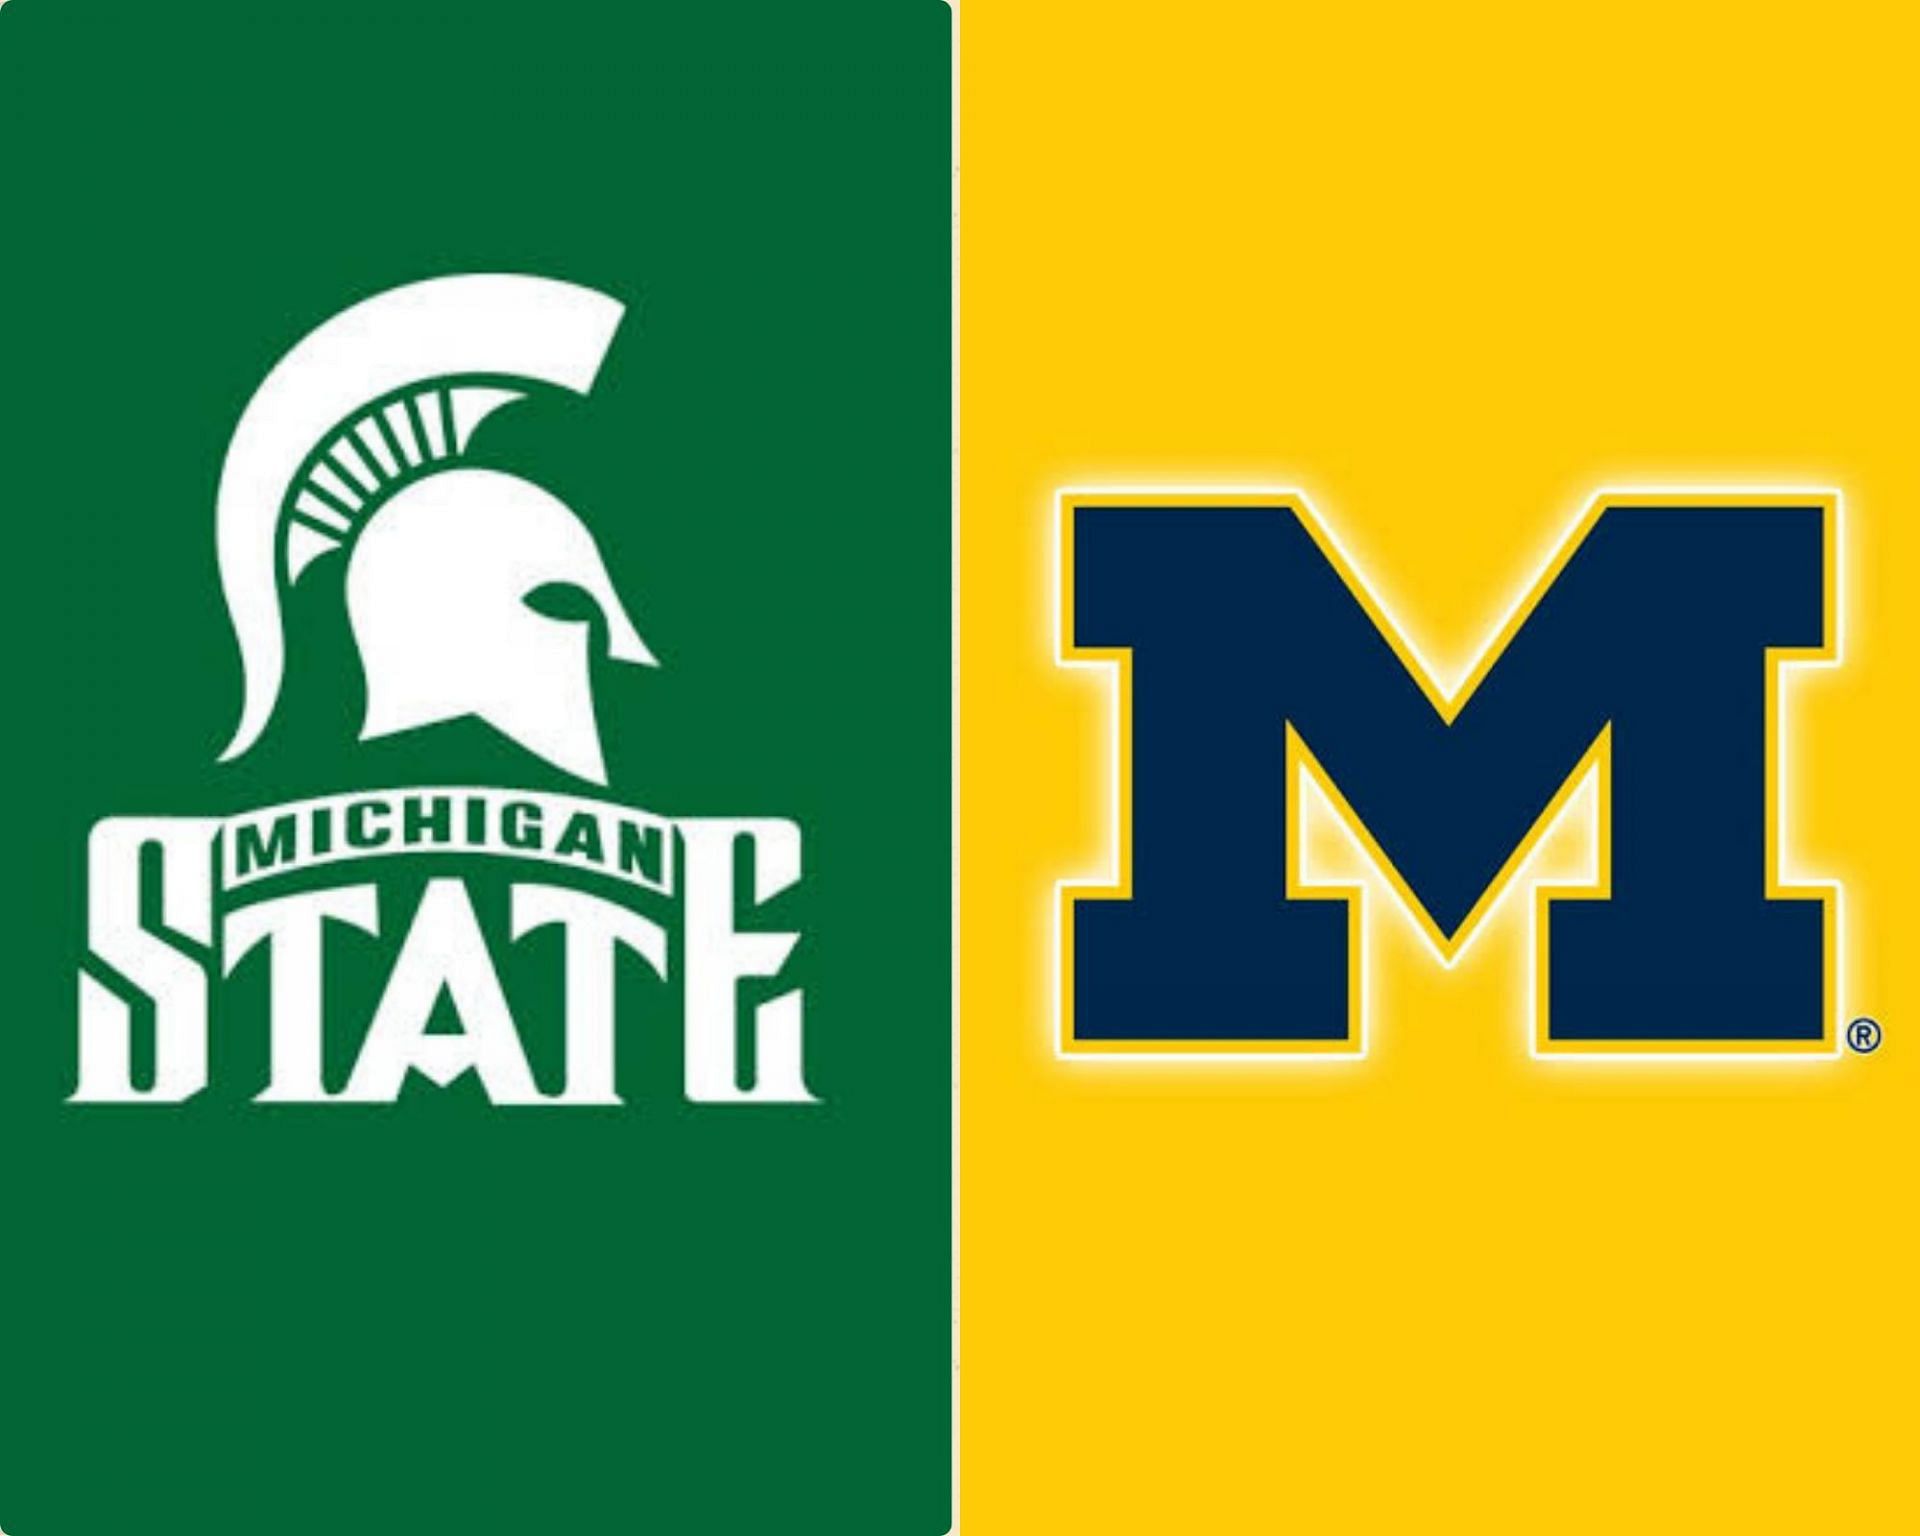 The Michigan vs. Michigan State rivalry is one of the fiercest in college football